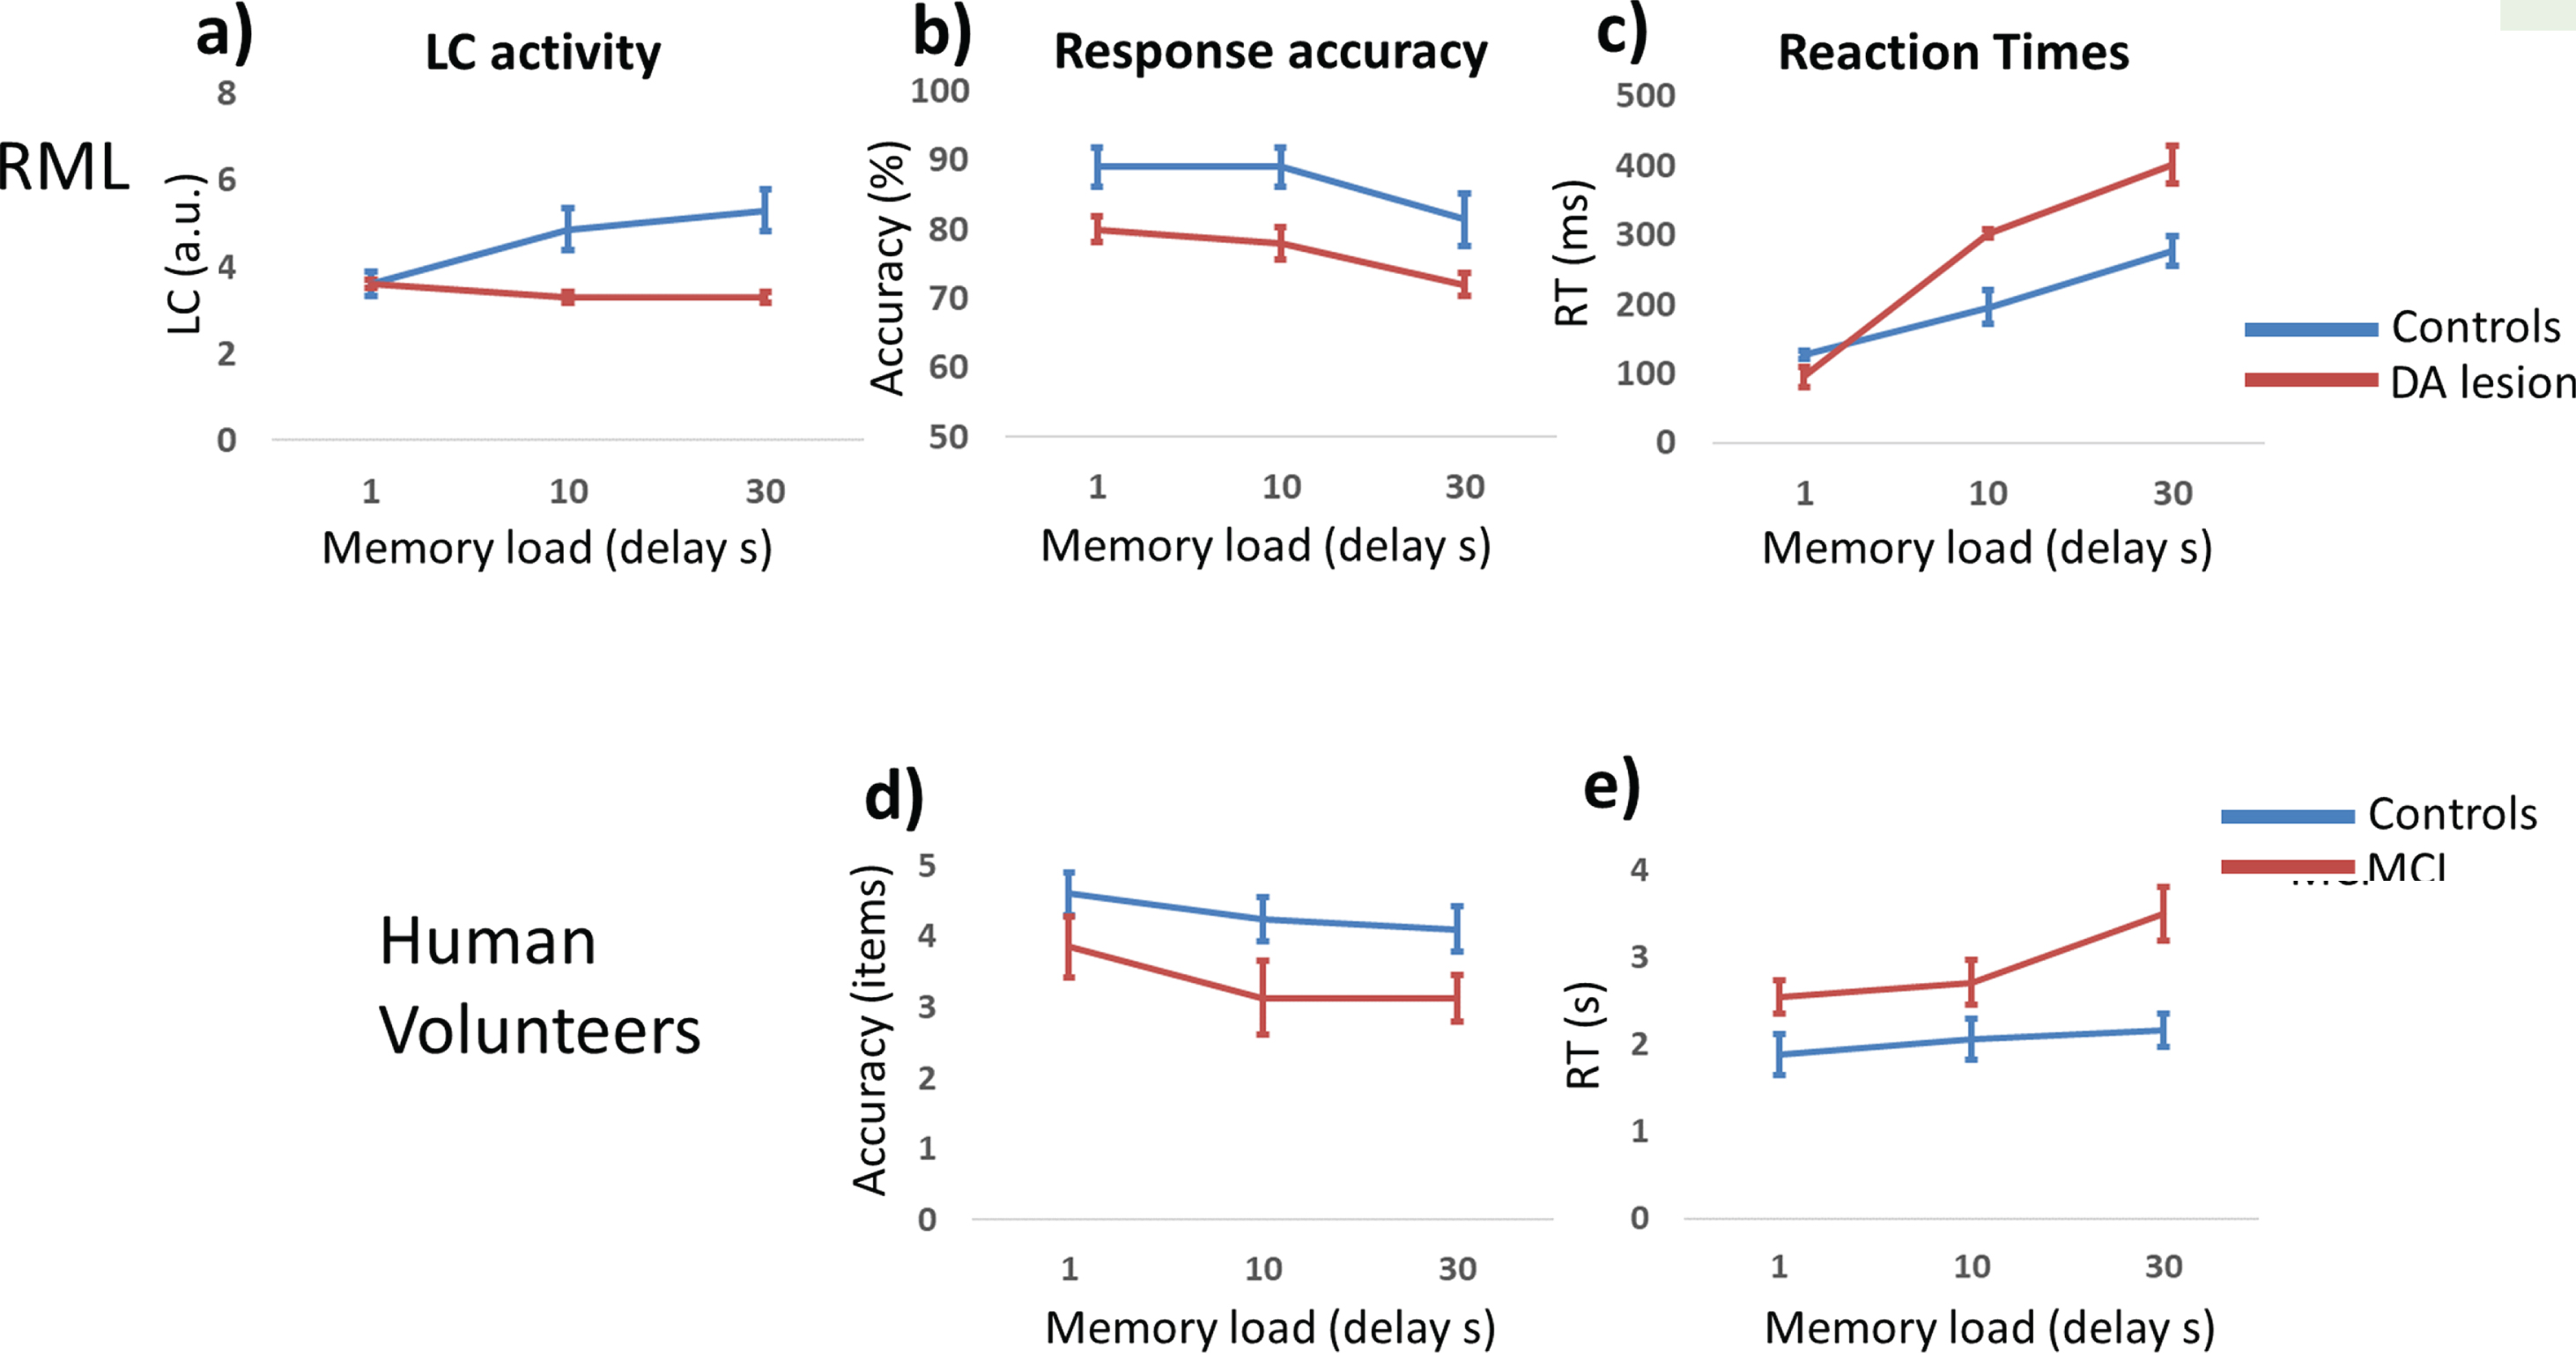 Neural and behavioural results from Simulation 1 (a–c), compared with experimental data from humans (d, e), related to the performance of MCI and control participants in a delay memory test. Blue plots indicate human or simulated controls, while red plots indicate human or simulated patients. a) LC module activation (arbitrary units, a.u.) as a function of task difficulty (delay duration). Error bars indicate s.e.m. b) Response accuracy as a function of difficulty (±s.e.m). c) RTs as a function of task difficulty (±s.e.m). d) Response accuracy in human participants (from [30]; number of recalled items±s.e.m) in a similar WM task. e) RTs in human participants (±s.e.m) from the same data set [30].